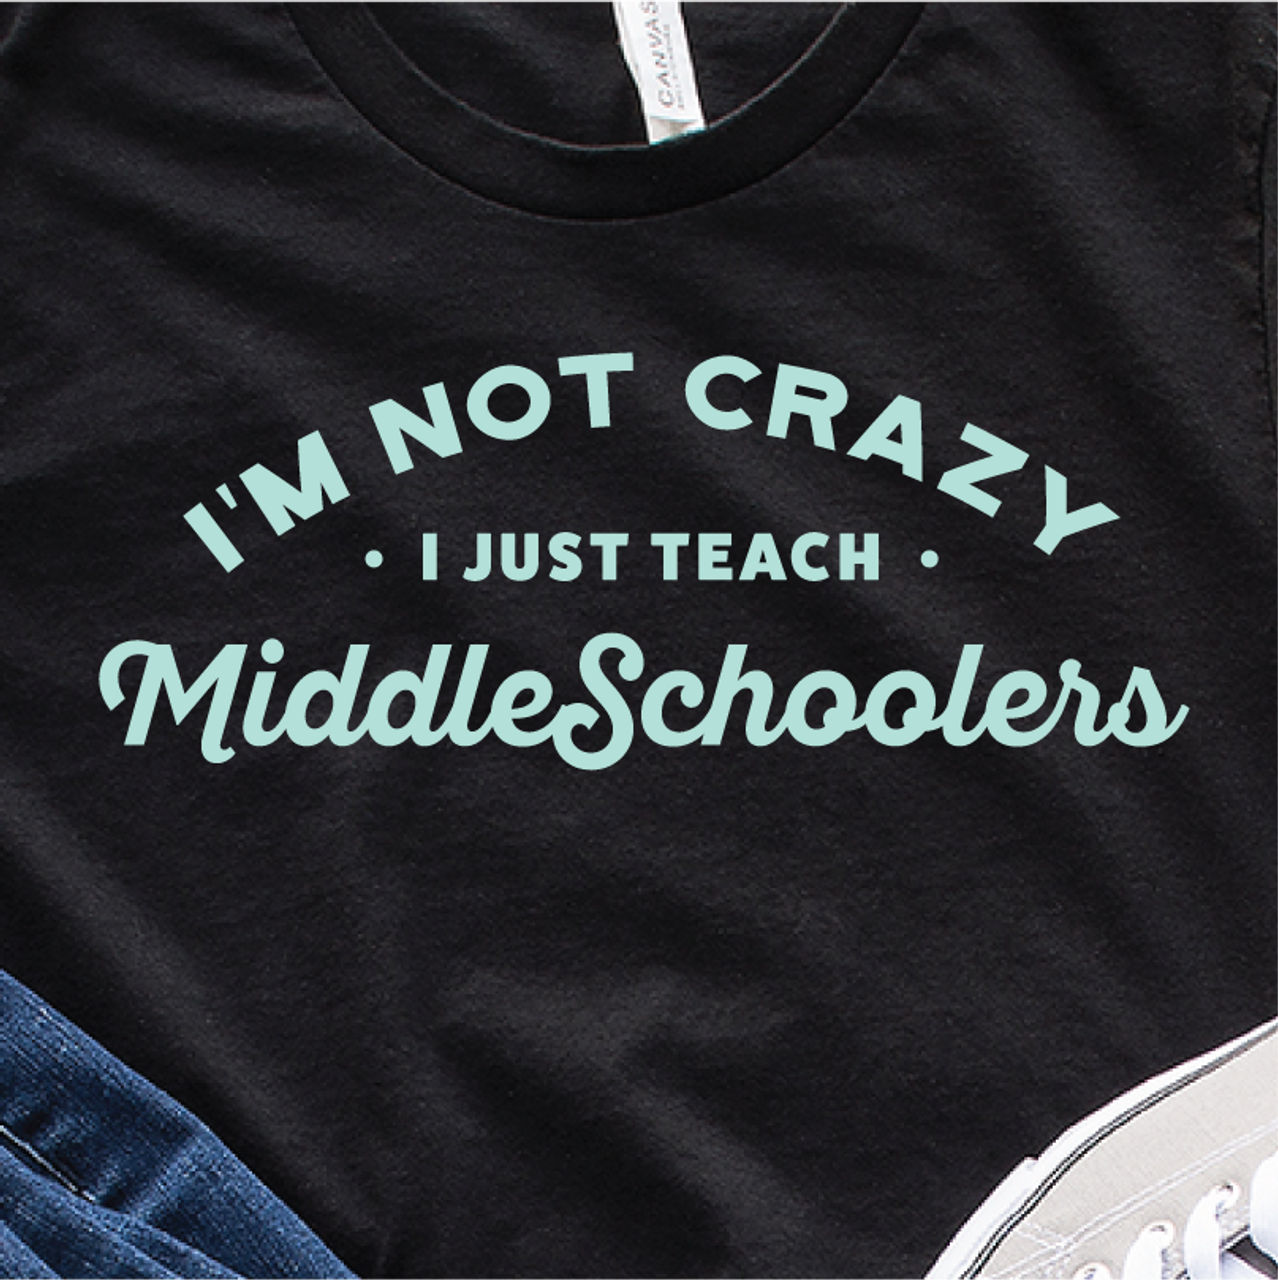 "I'm not crazy. I just teach Middle Schoolers." T-Shirt